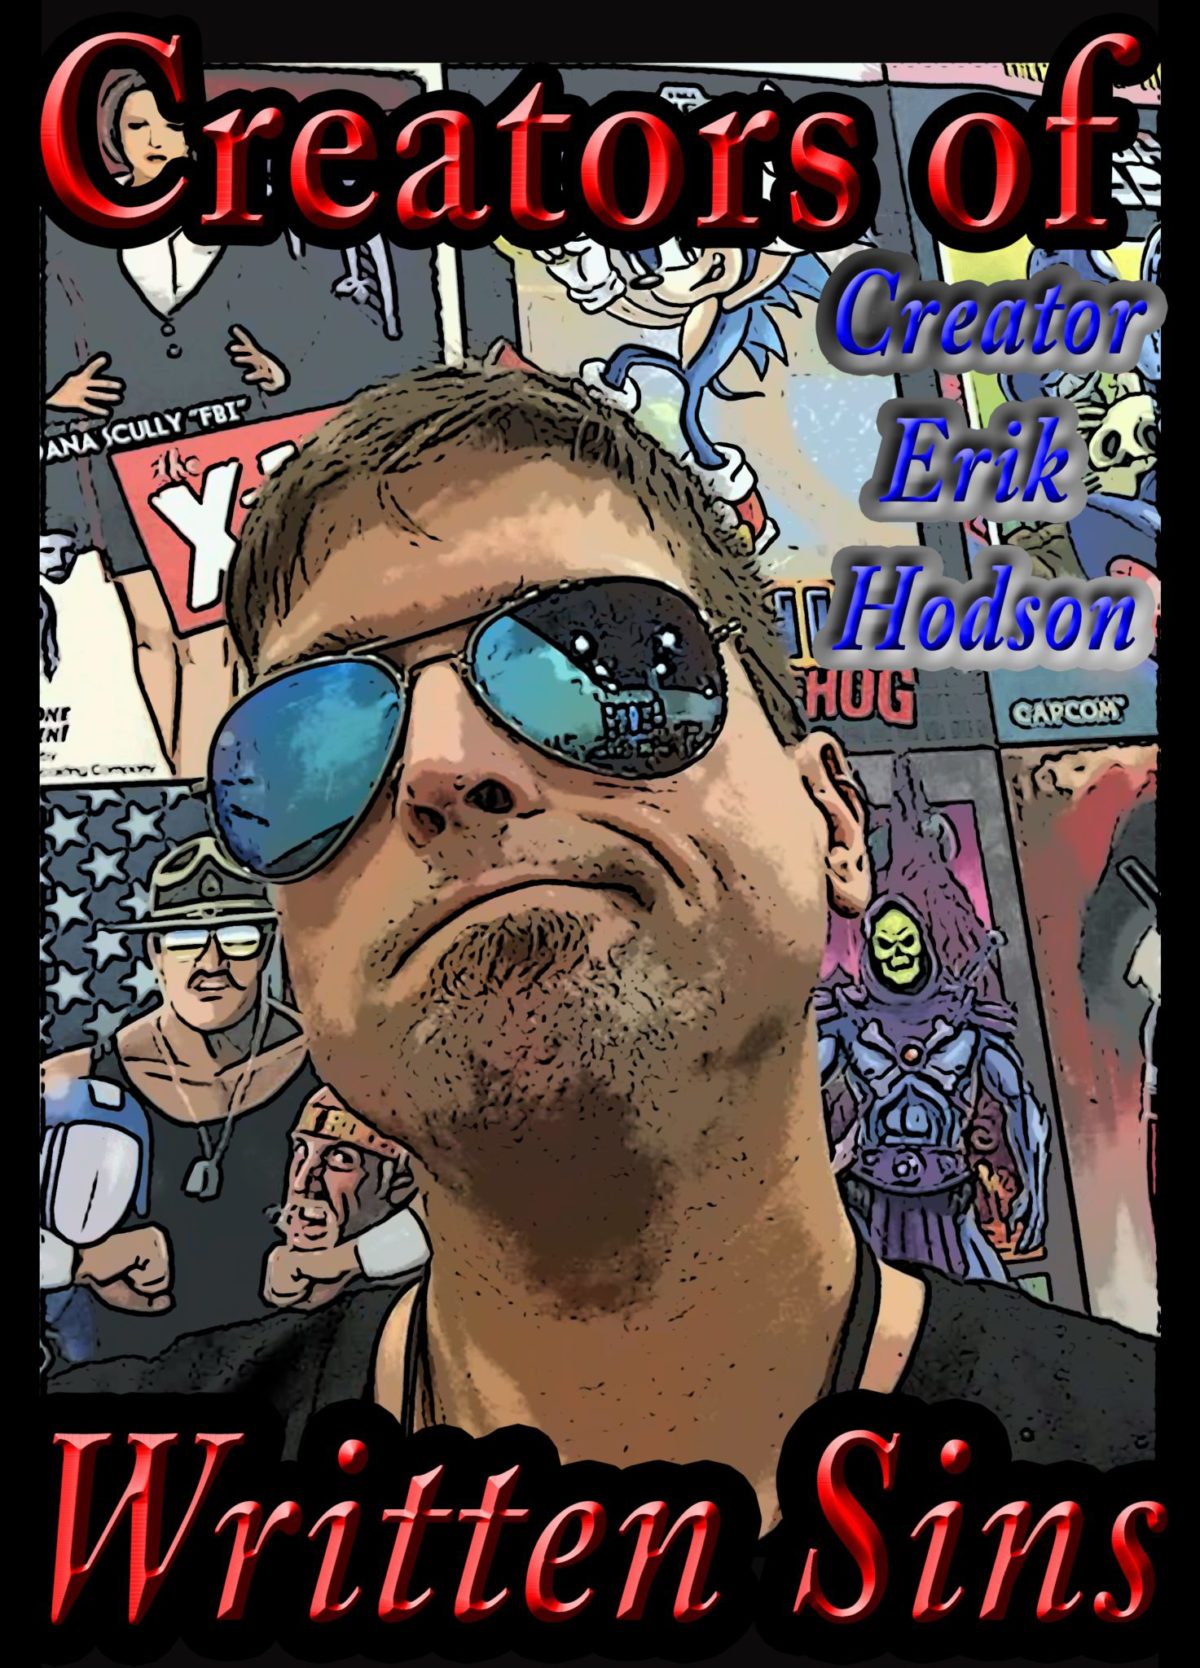 Card 11 is all About: Erik Hodson  .